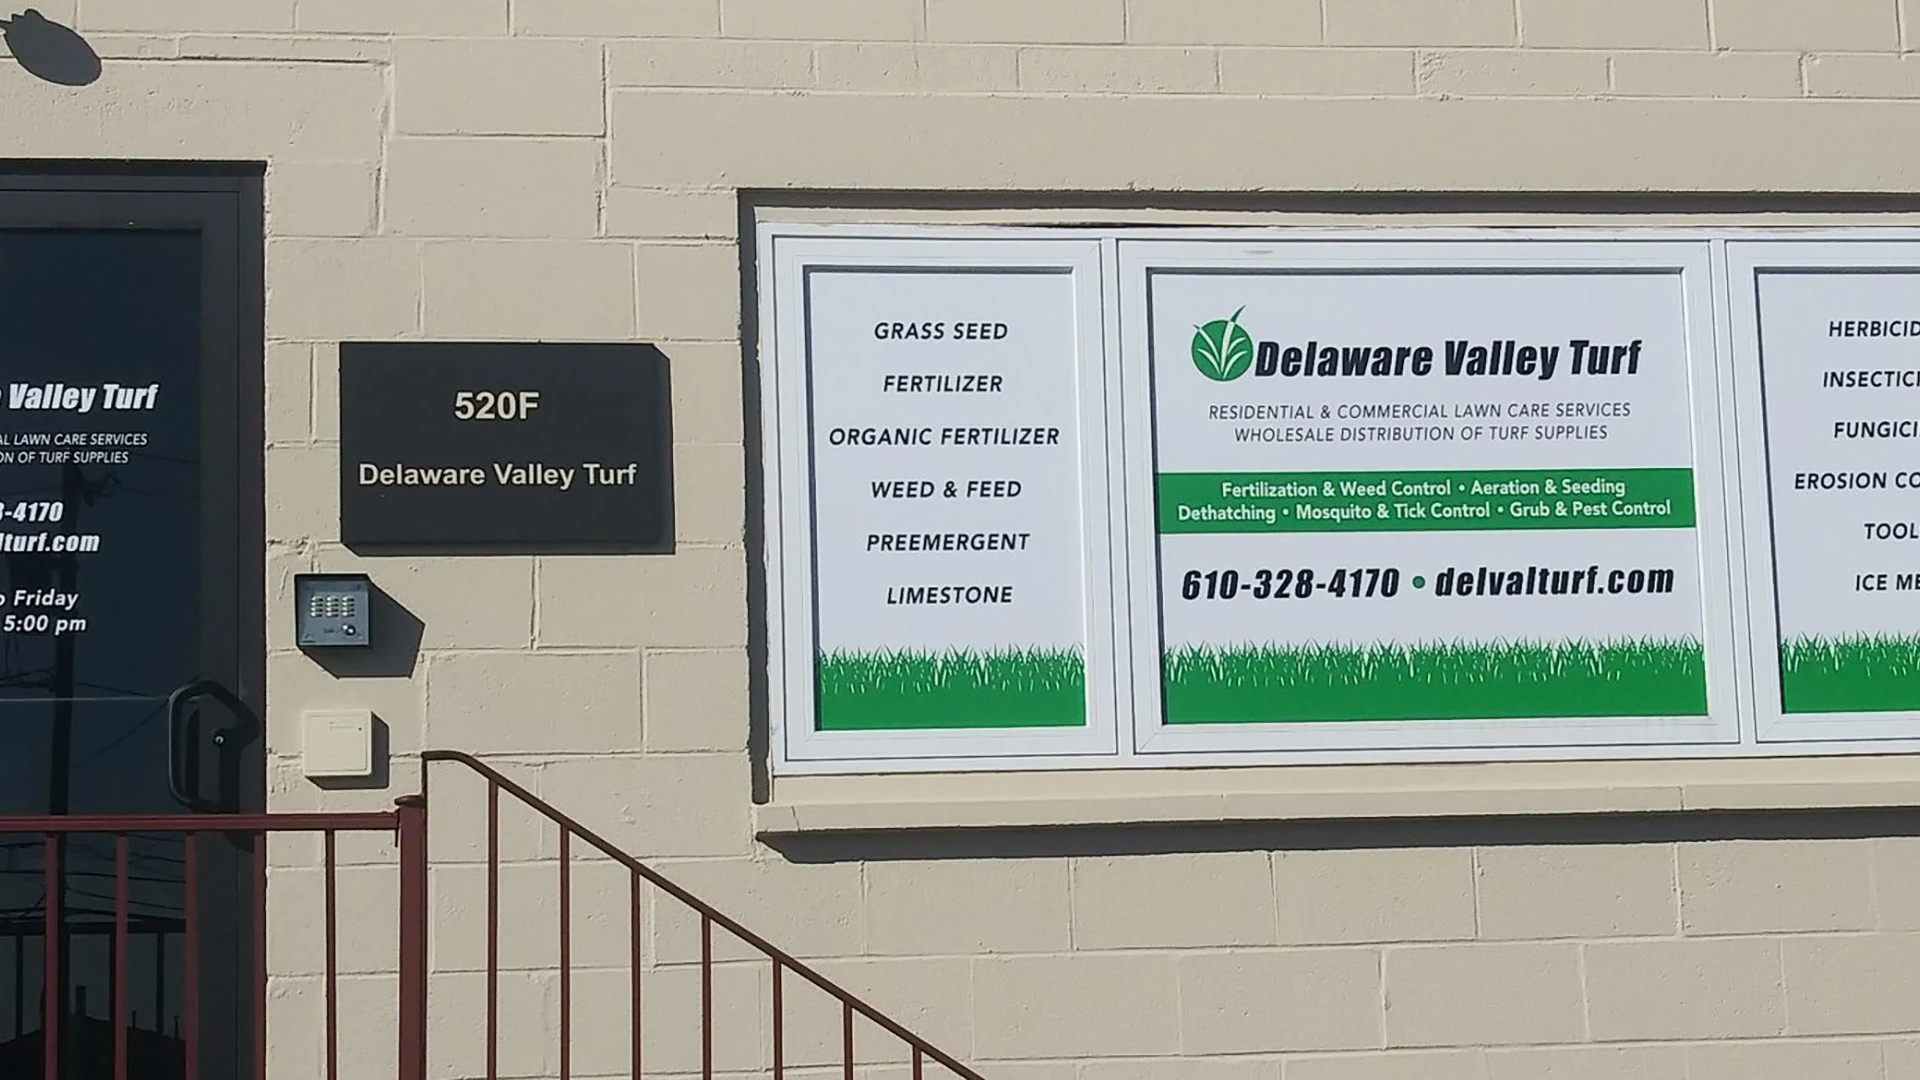 The Delaware Valley Turf Office in Pennsylvania.